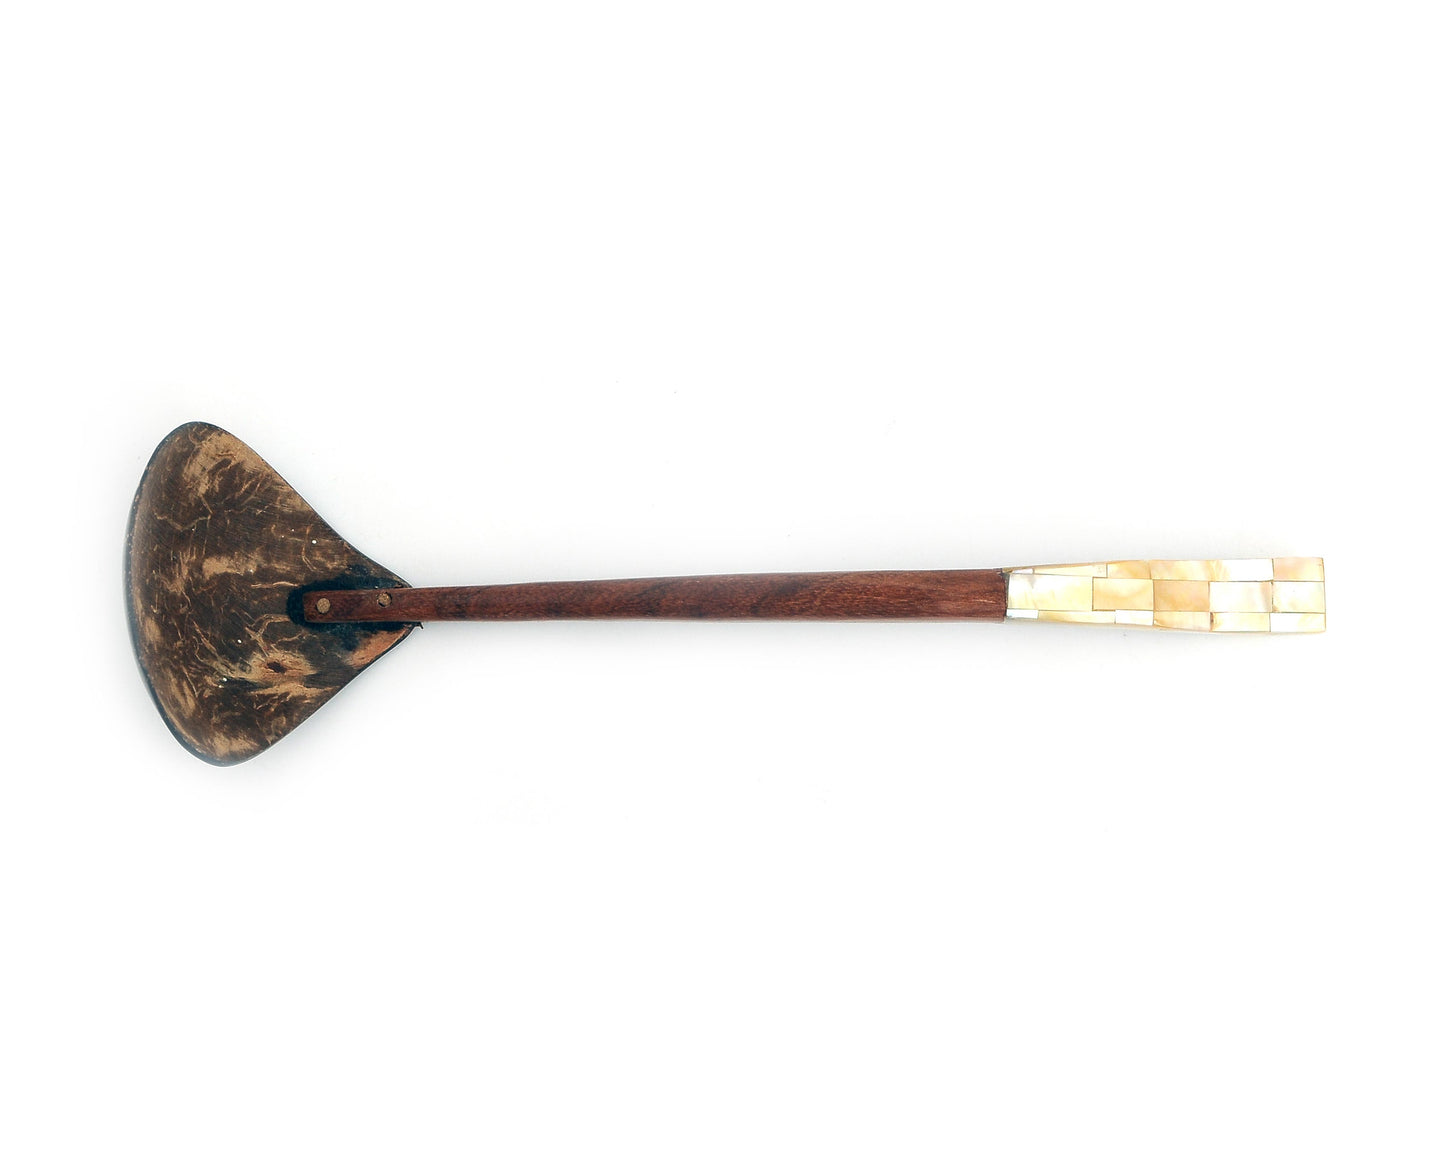 Myanmar Handmade Natural Wood Spoon Ladle With Mother of Pearl Seashell Inlay